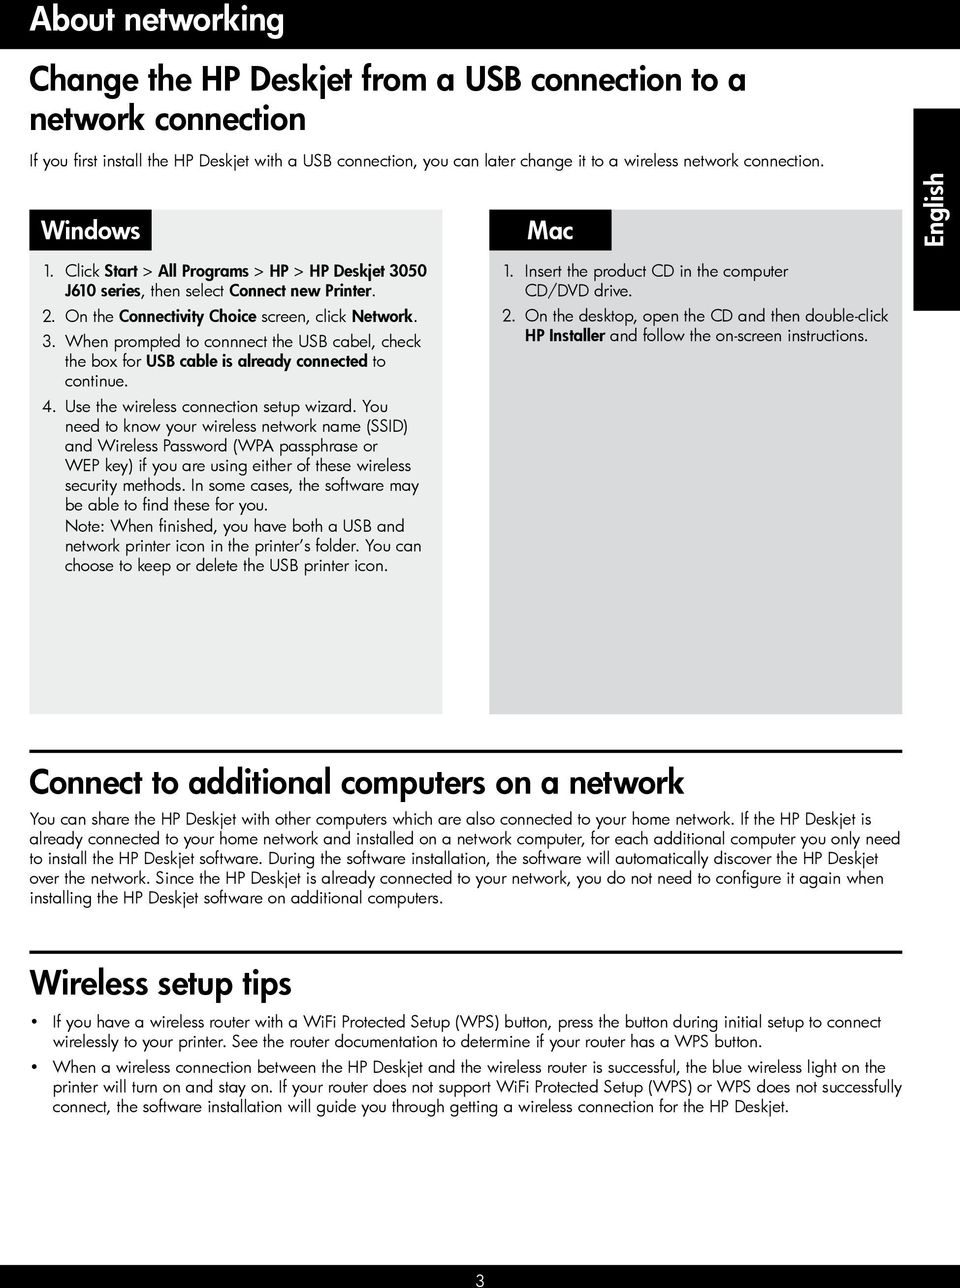 4. Use the wireless connection setup wizard.